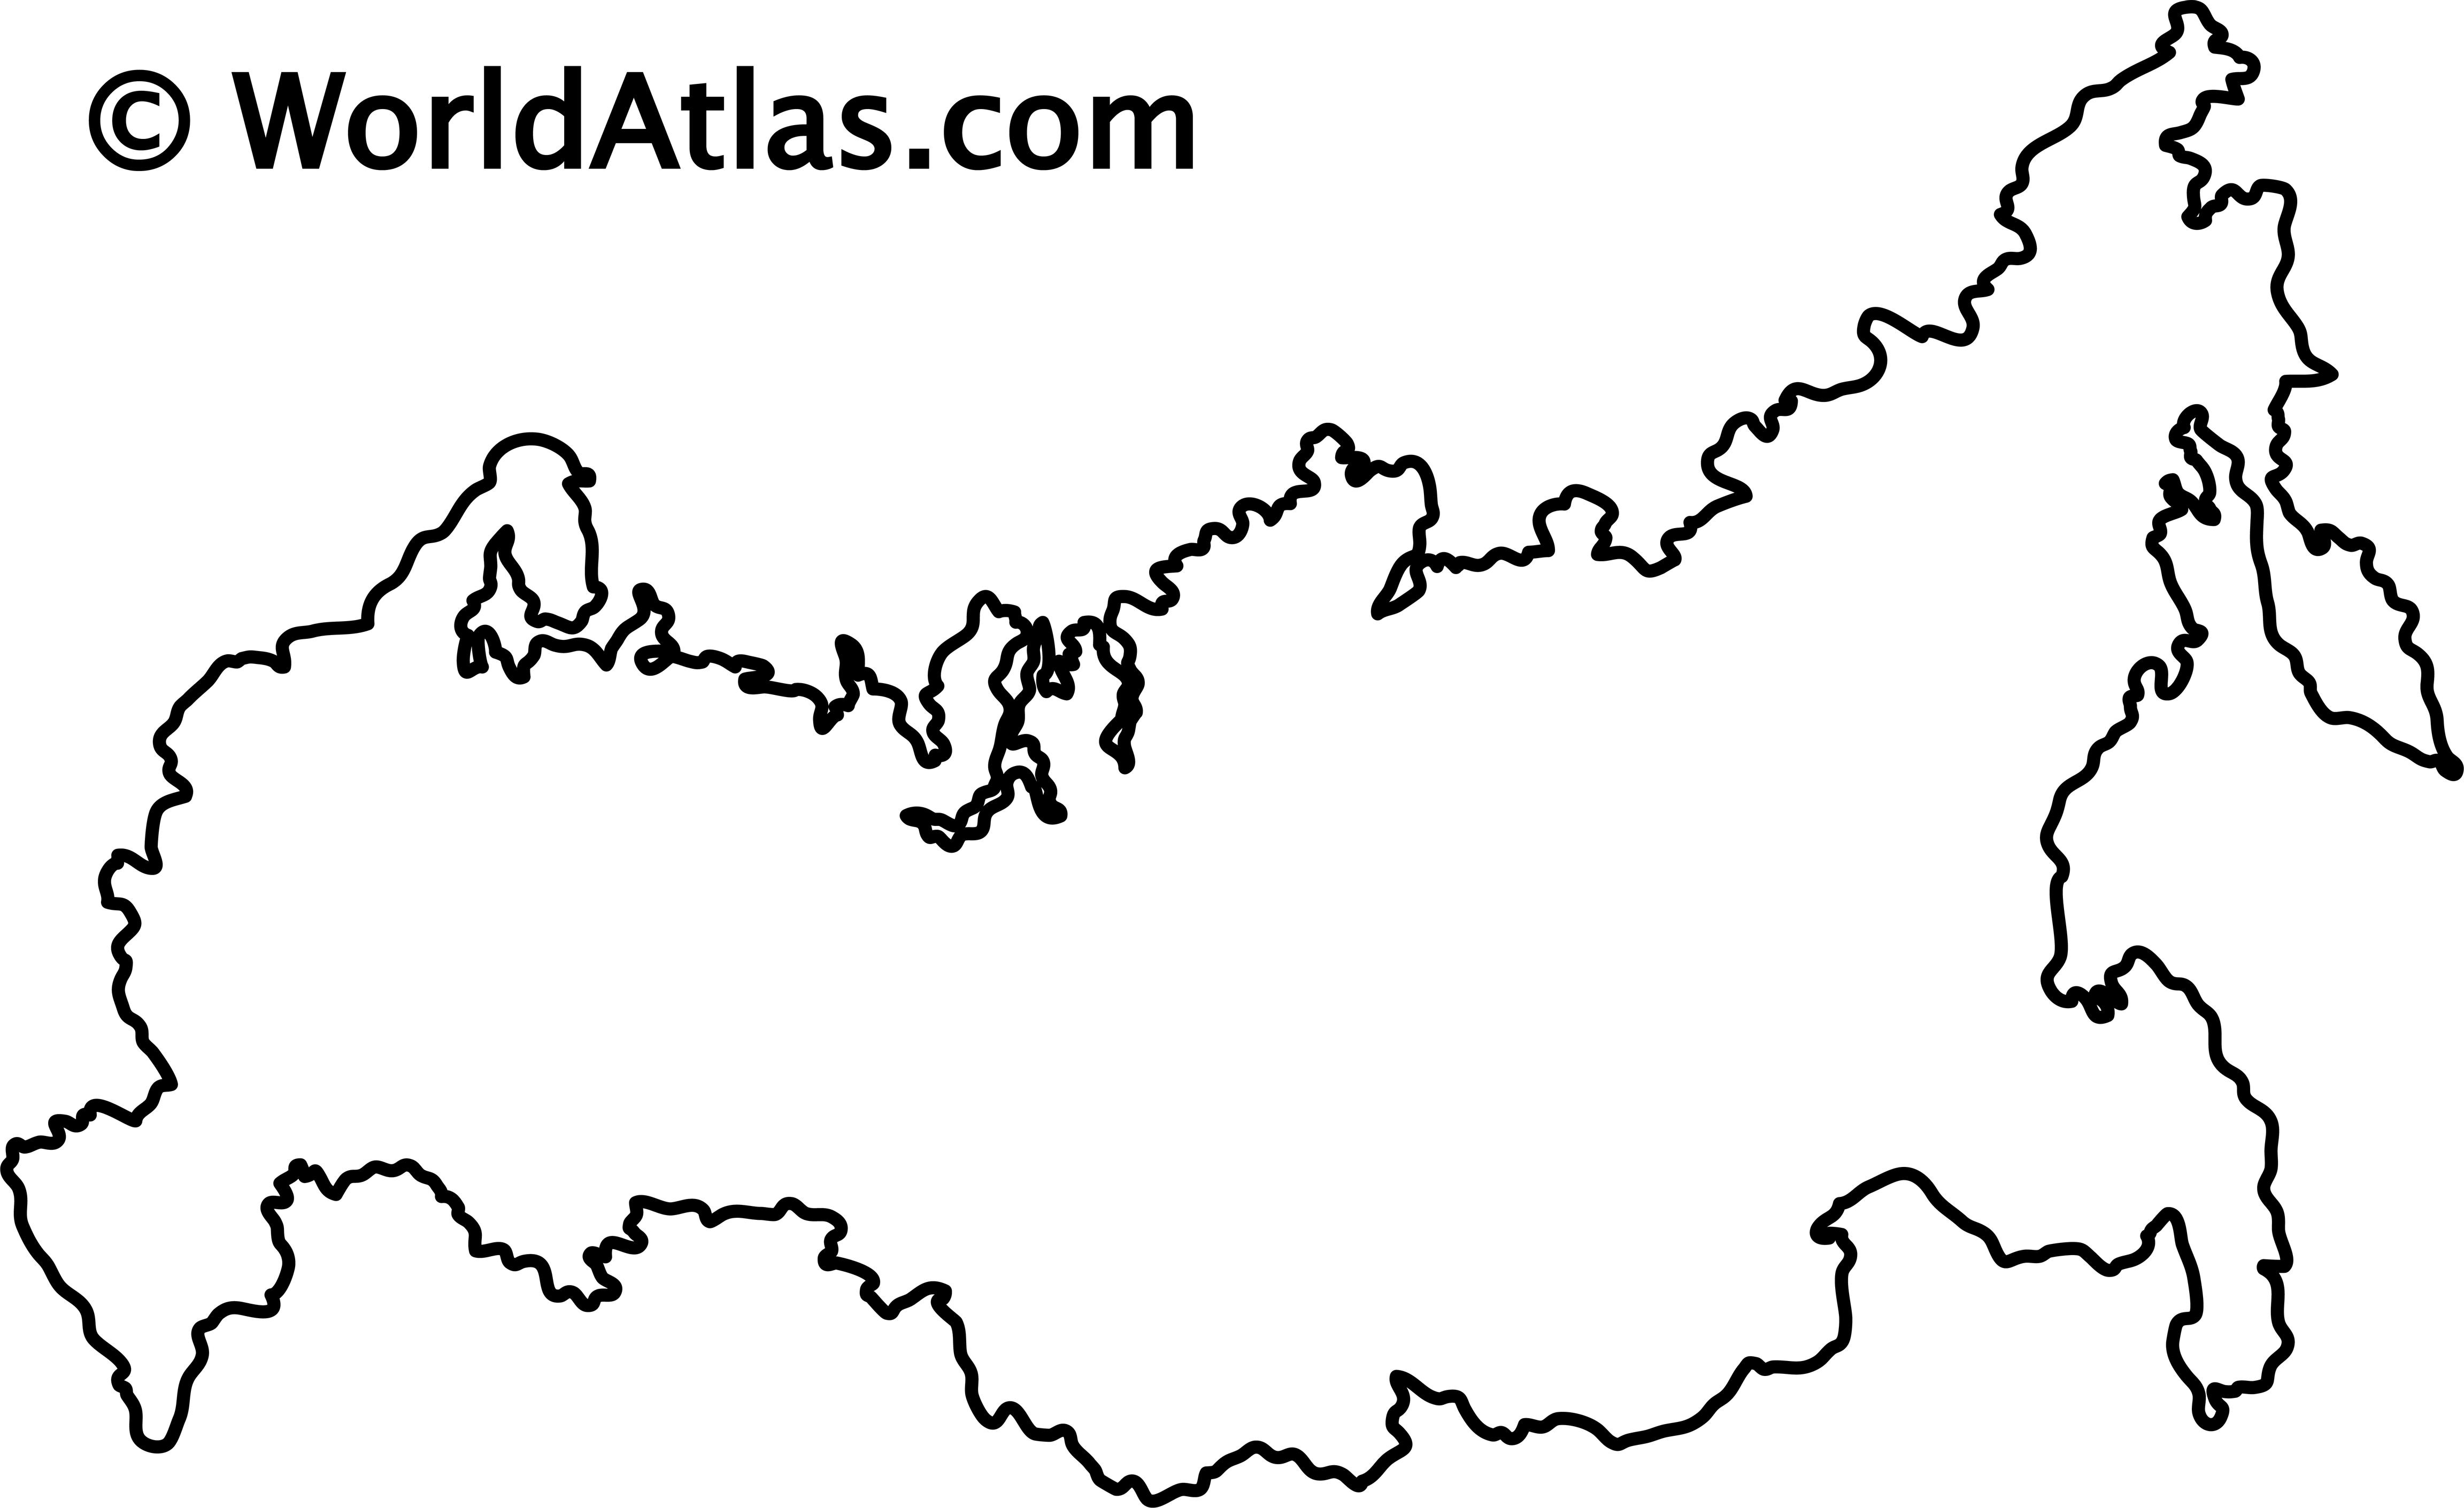 Russia Maps & Facts - World Atlas